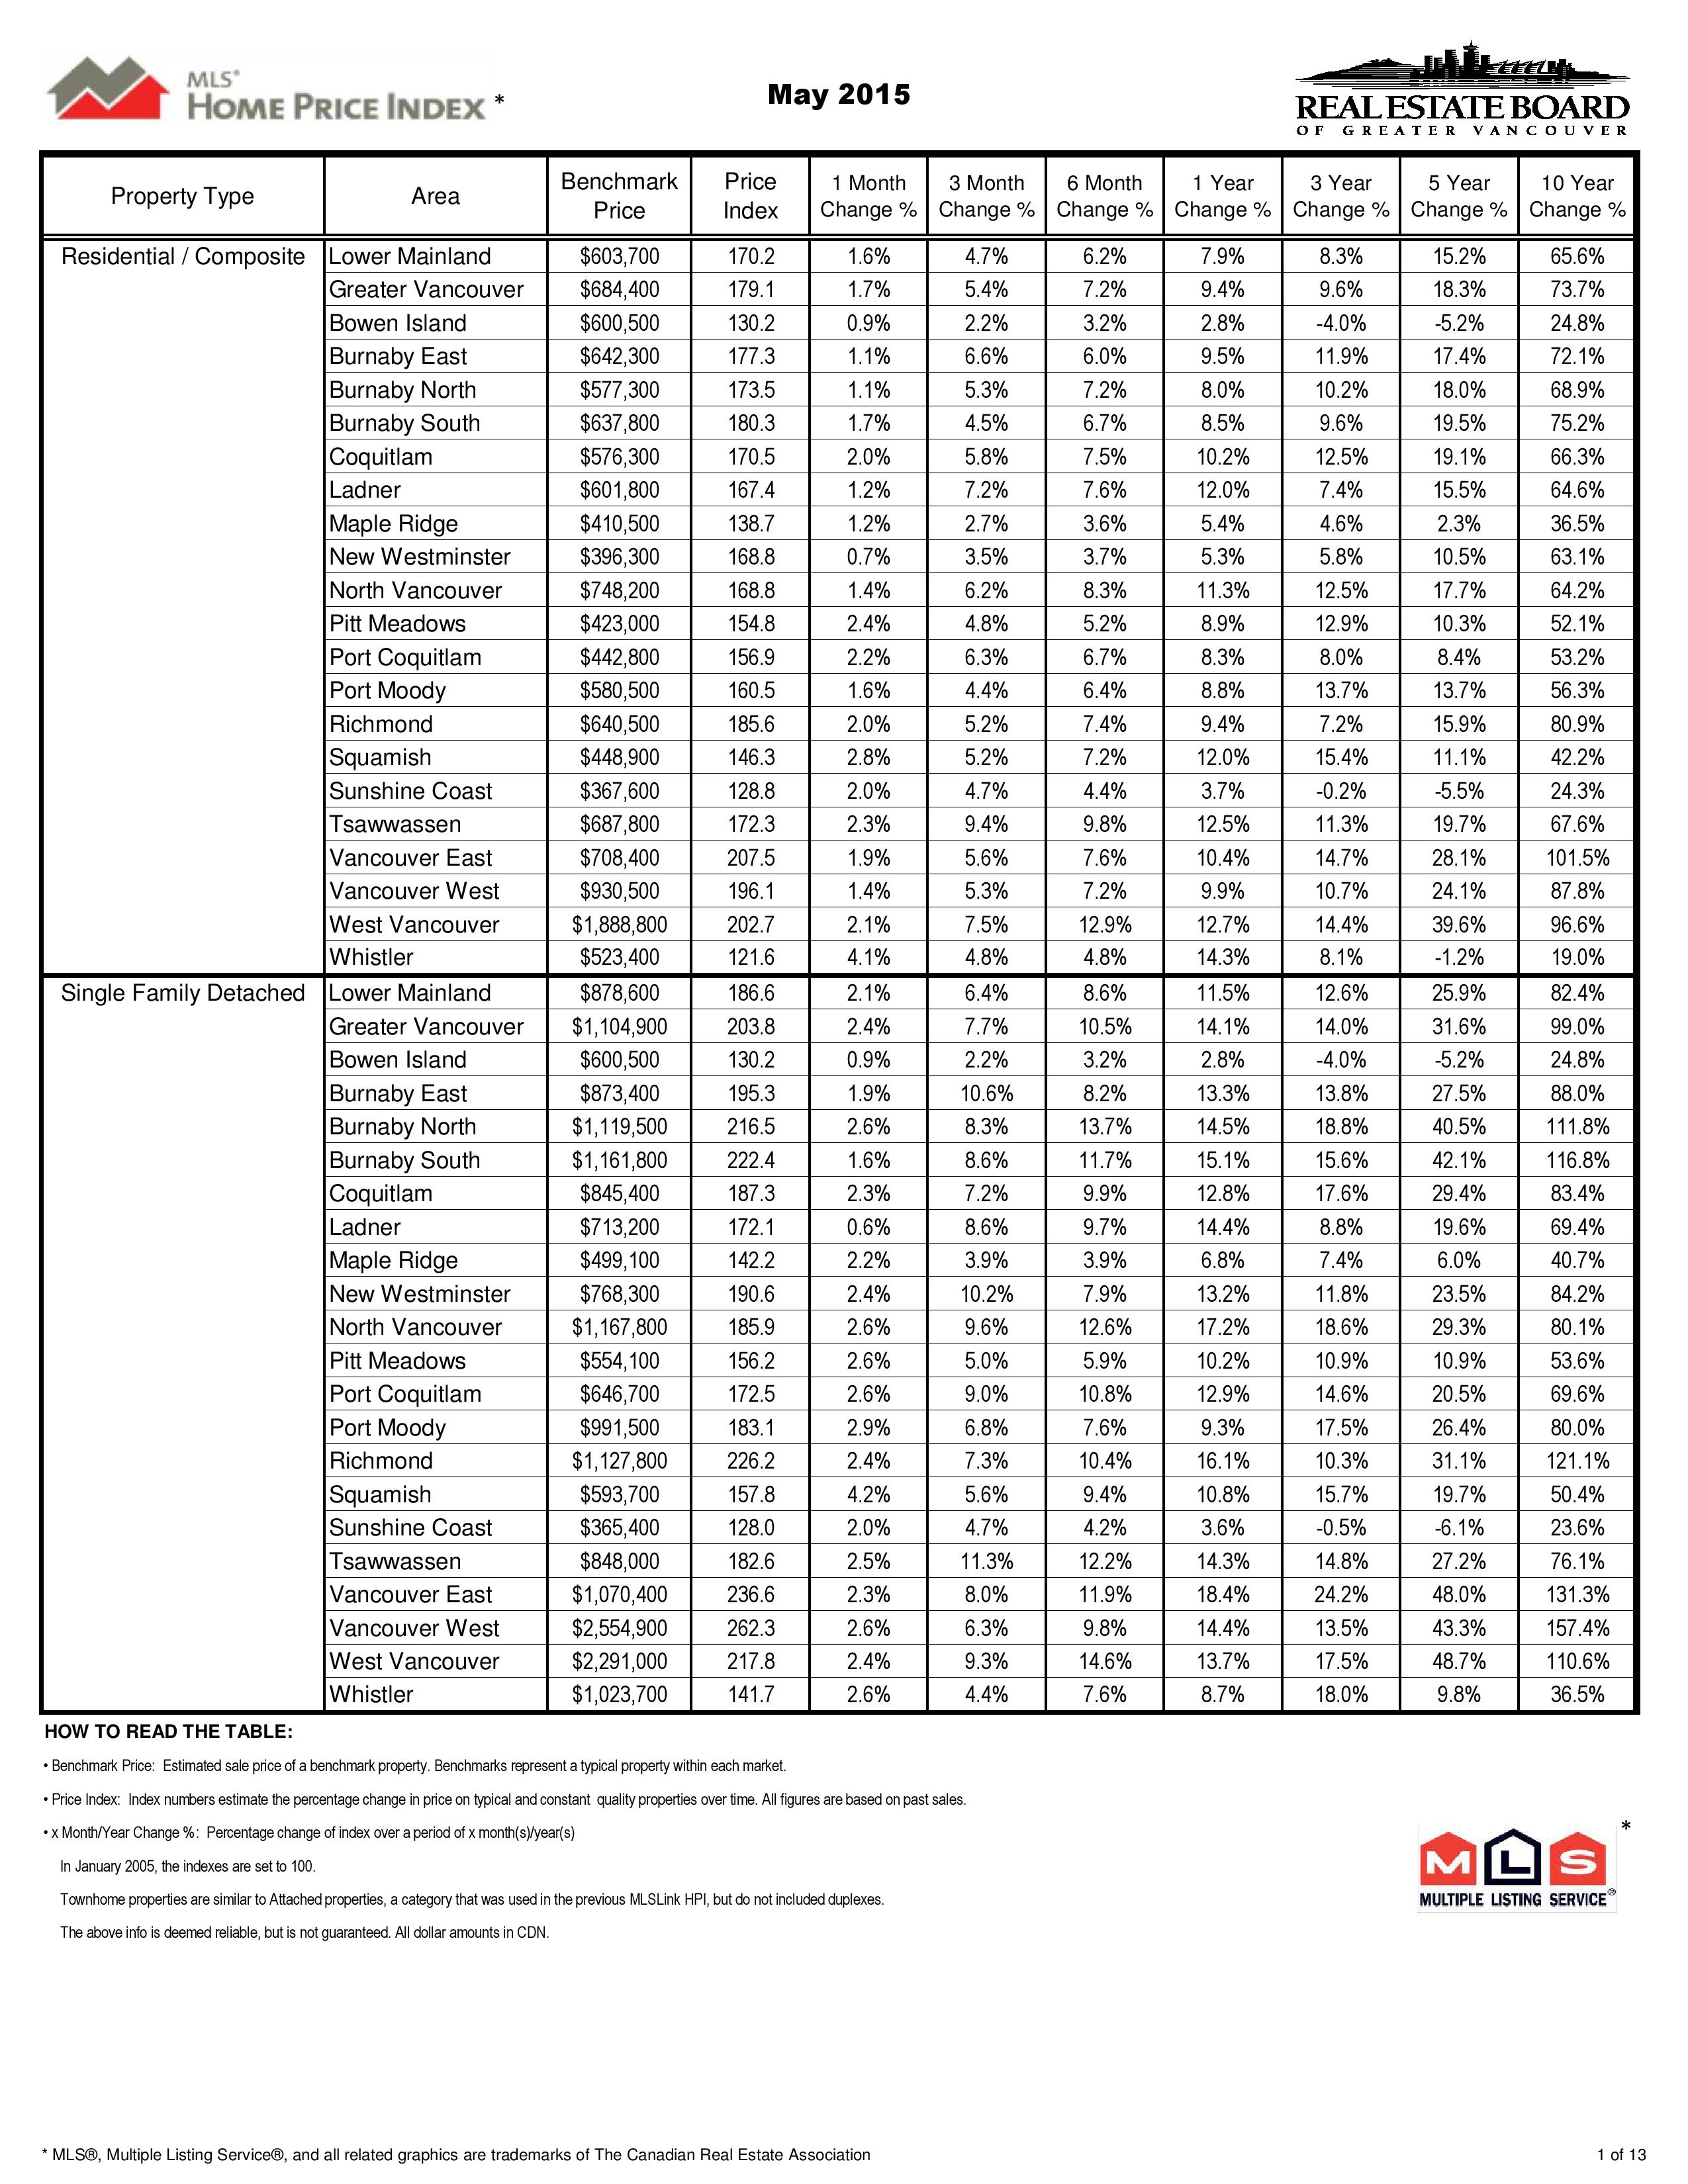 May 2015 REBGV Statitics Package Mike Stewart Vancouver Realtor-page-003